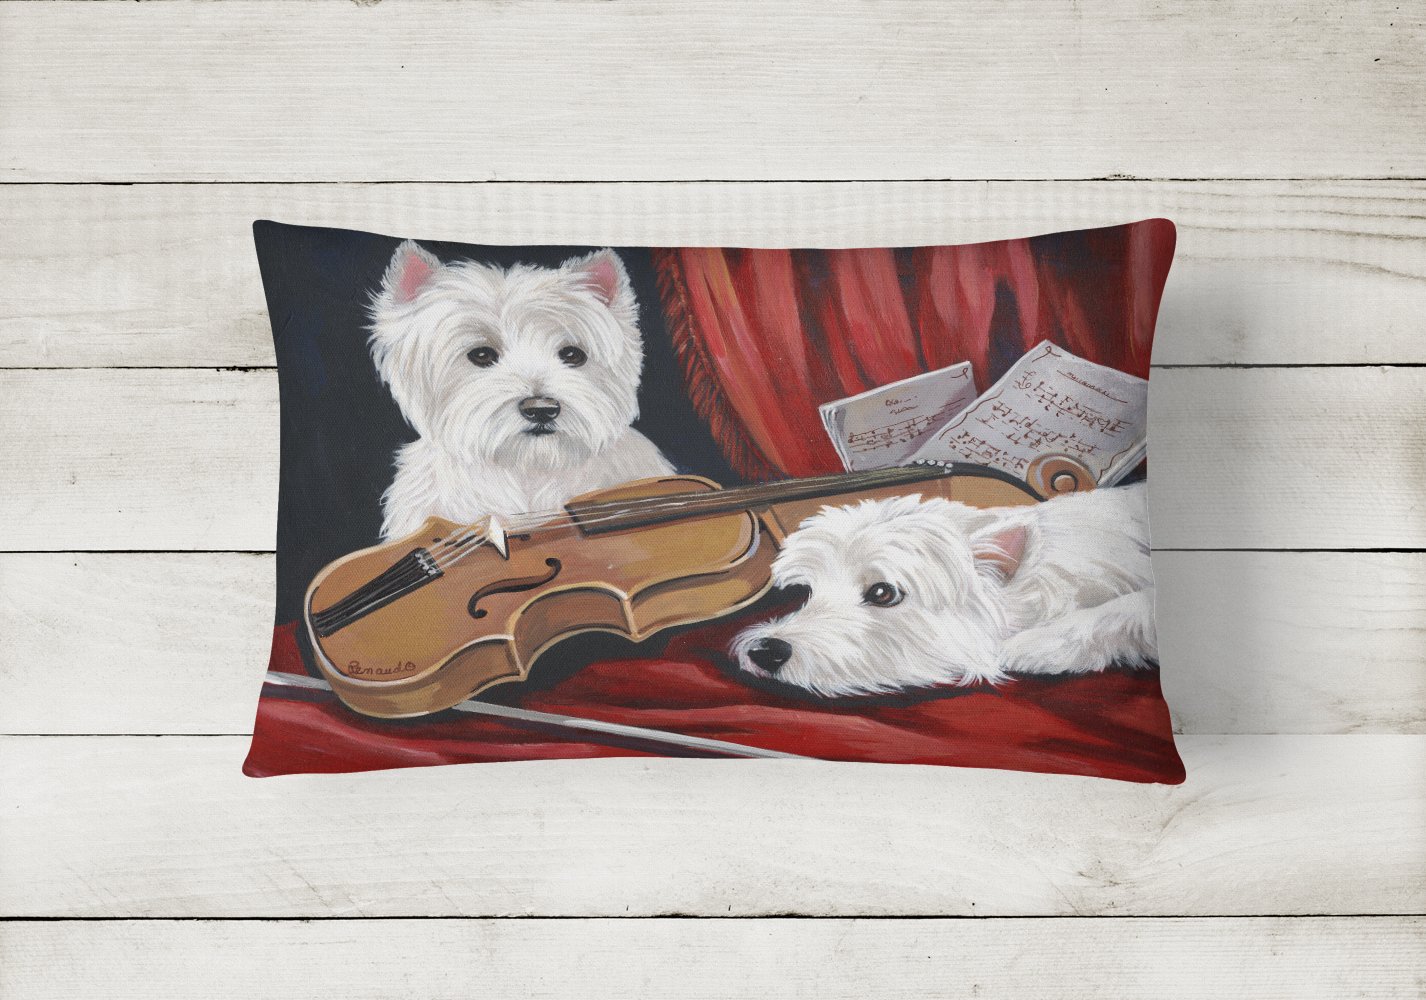 Buy this Westie Fiddlers Canvas Fabric Decorative Pillow PPP3279PW1216